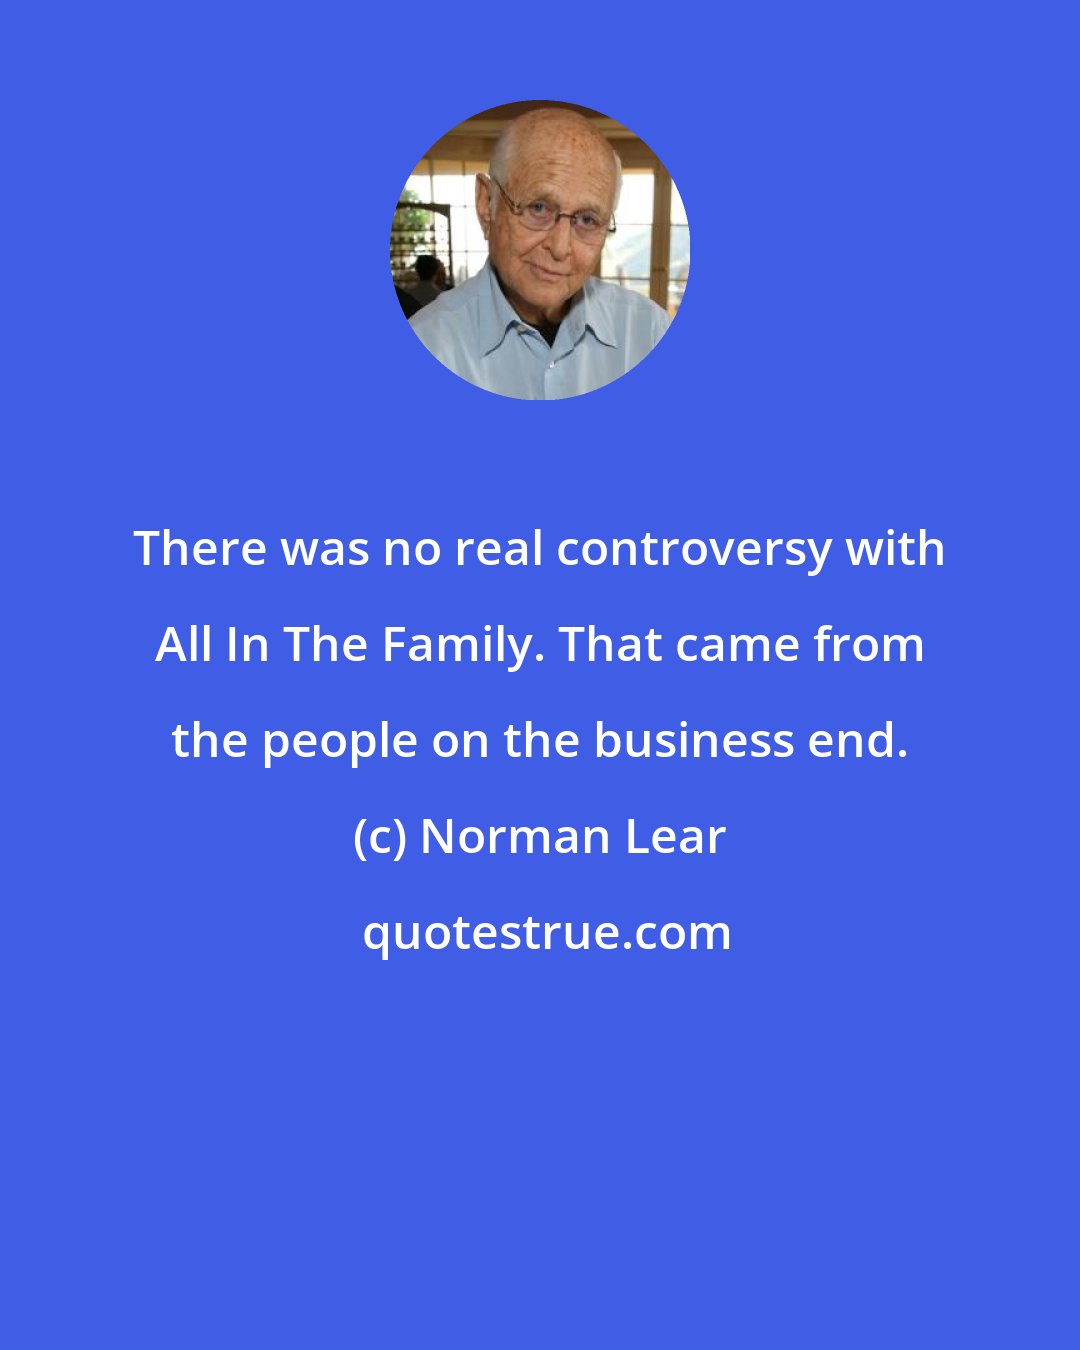 Norman Lear: There was no real controversy with All In The Family. That came from the people on the business end.